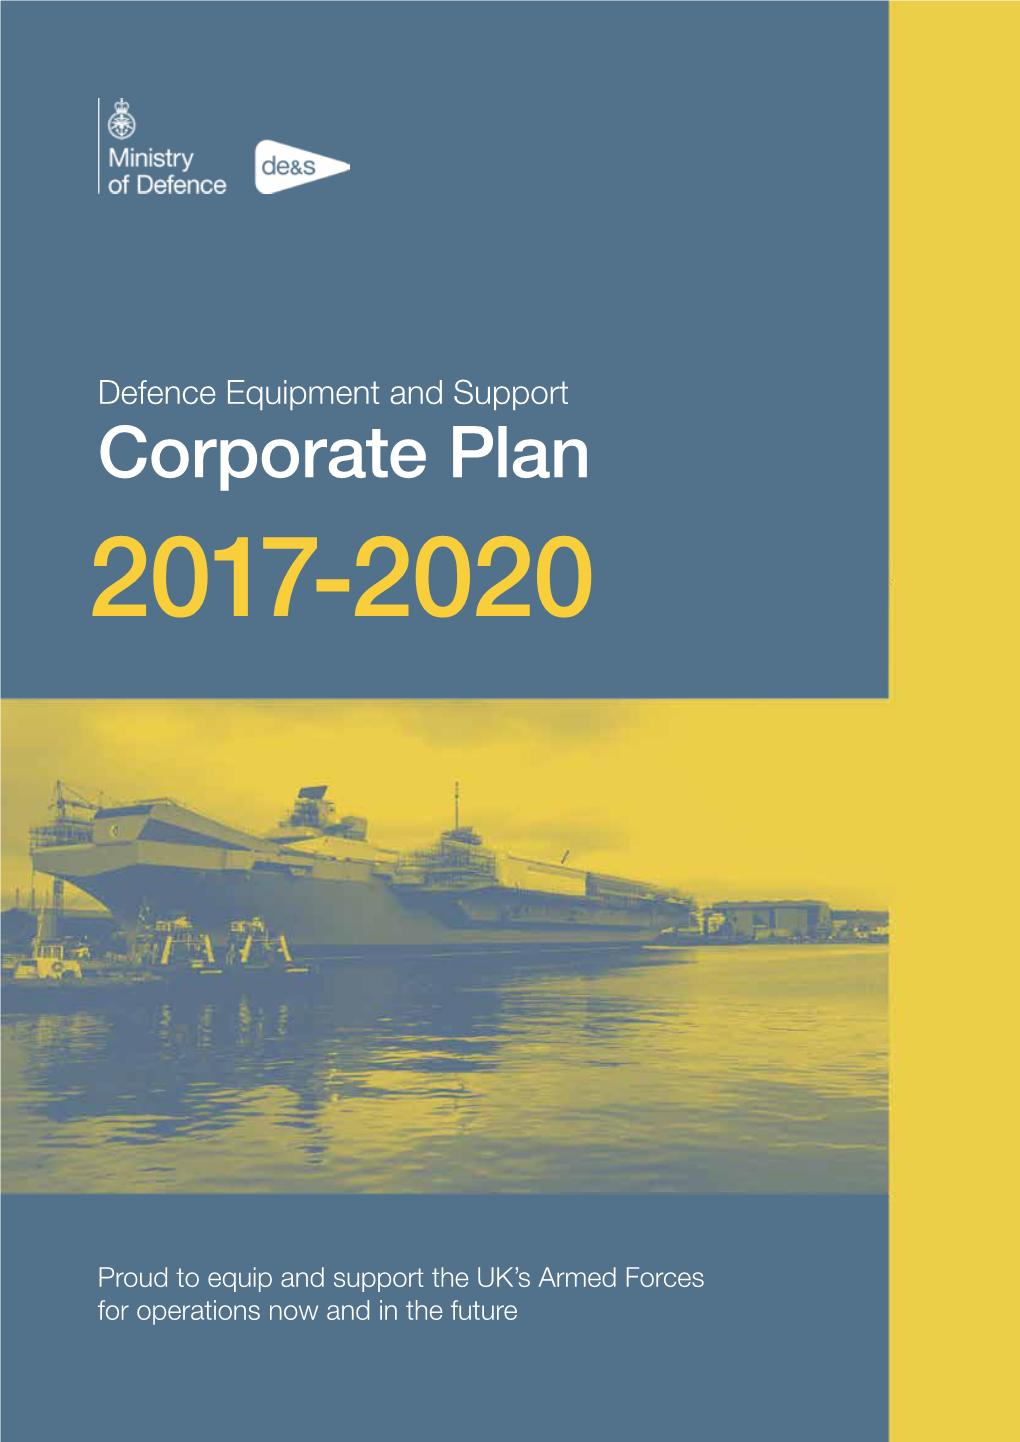 Defence Equipment and Support Corporate Plan 2017-2020